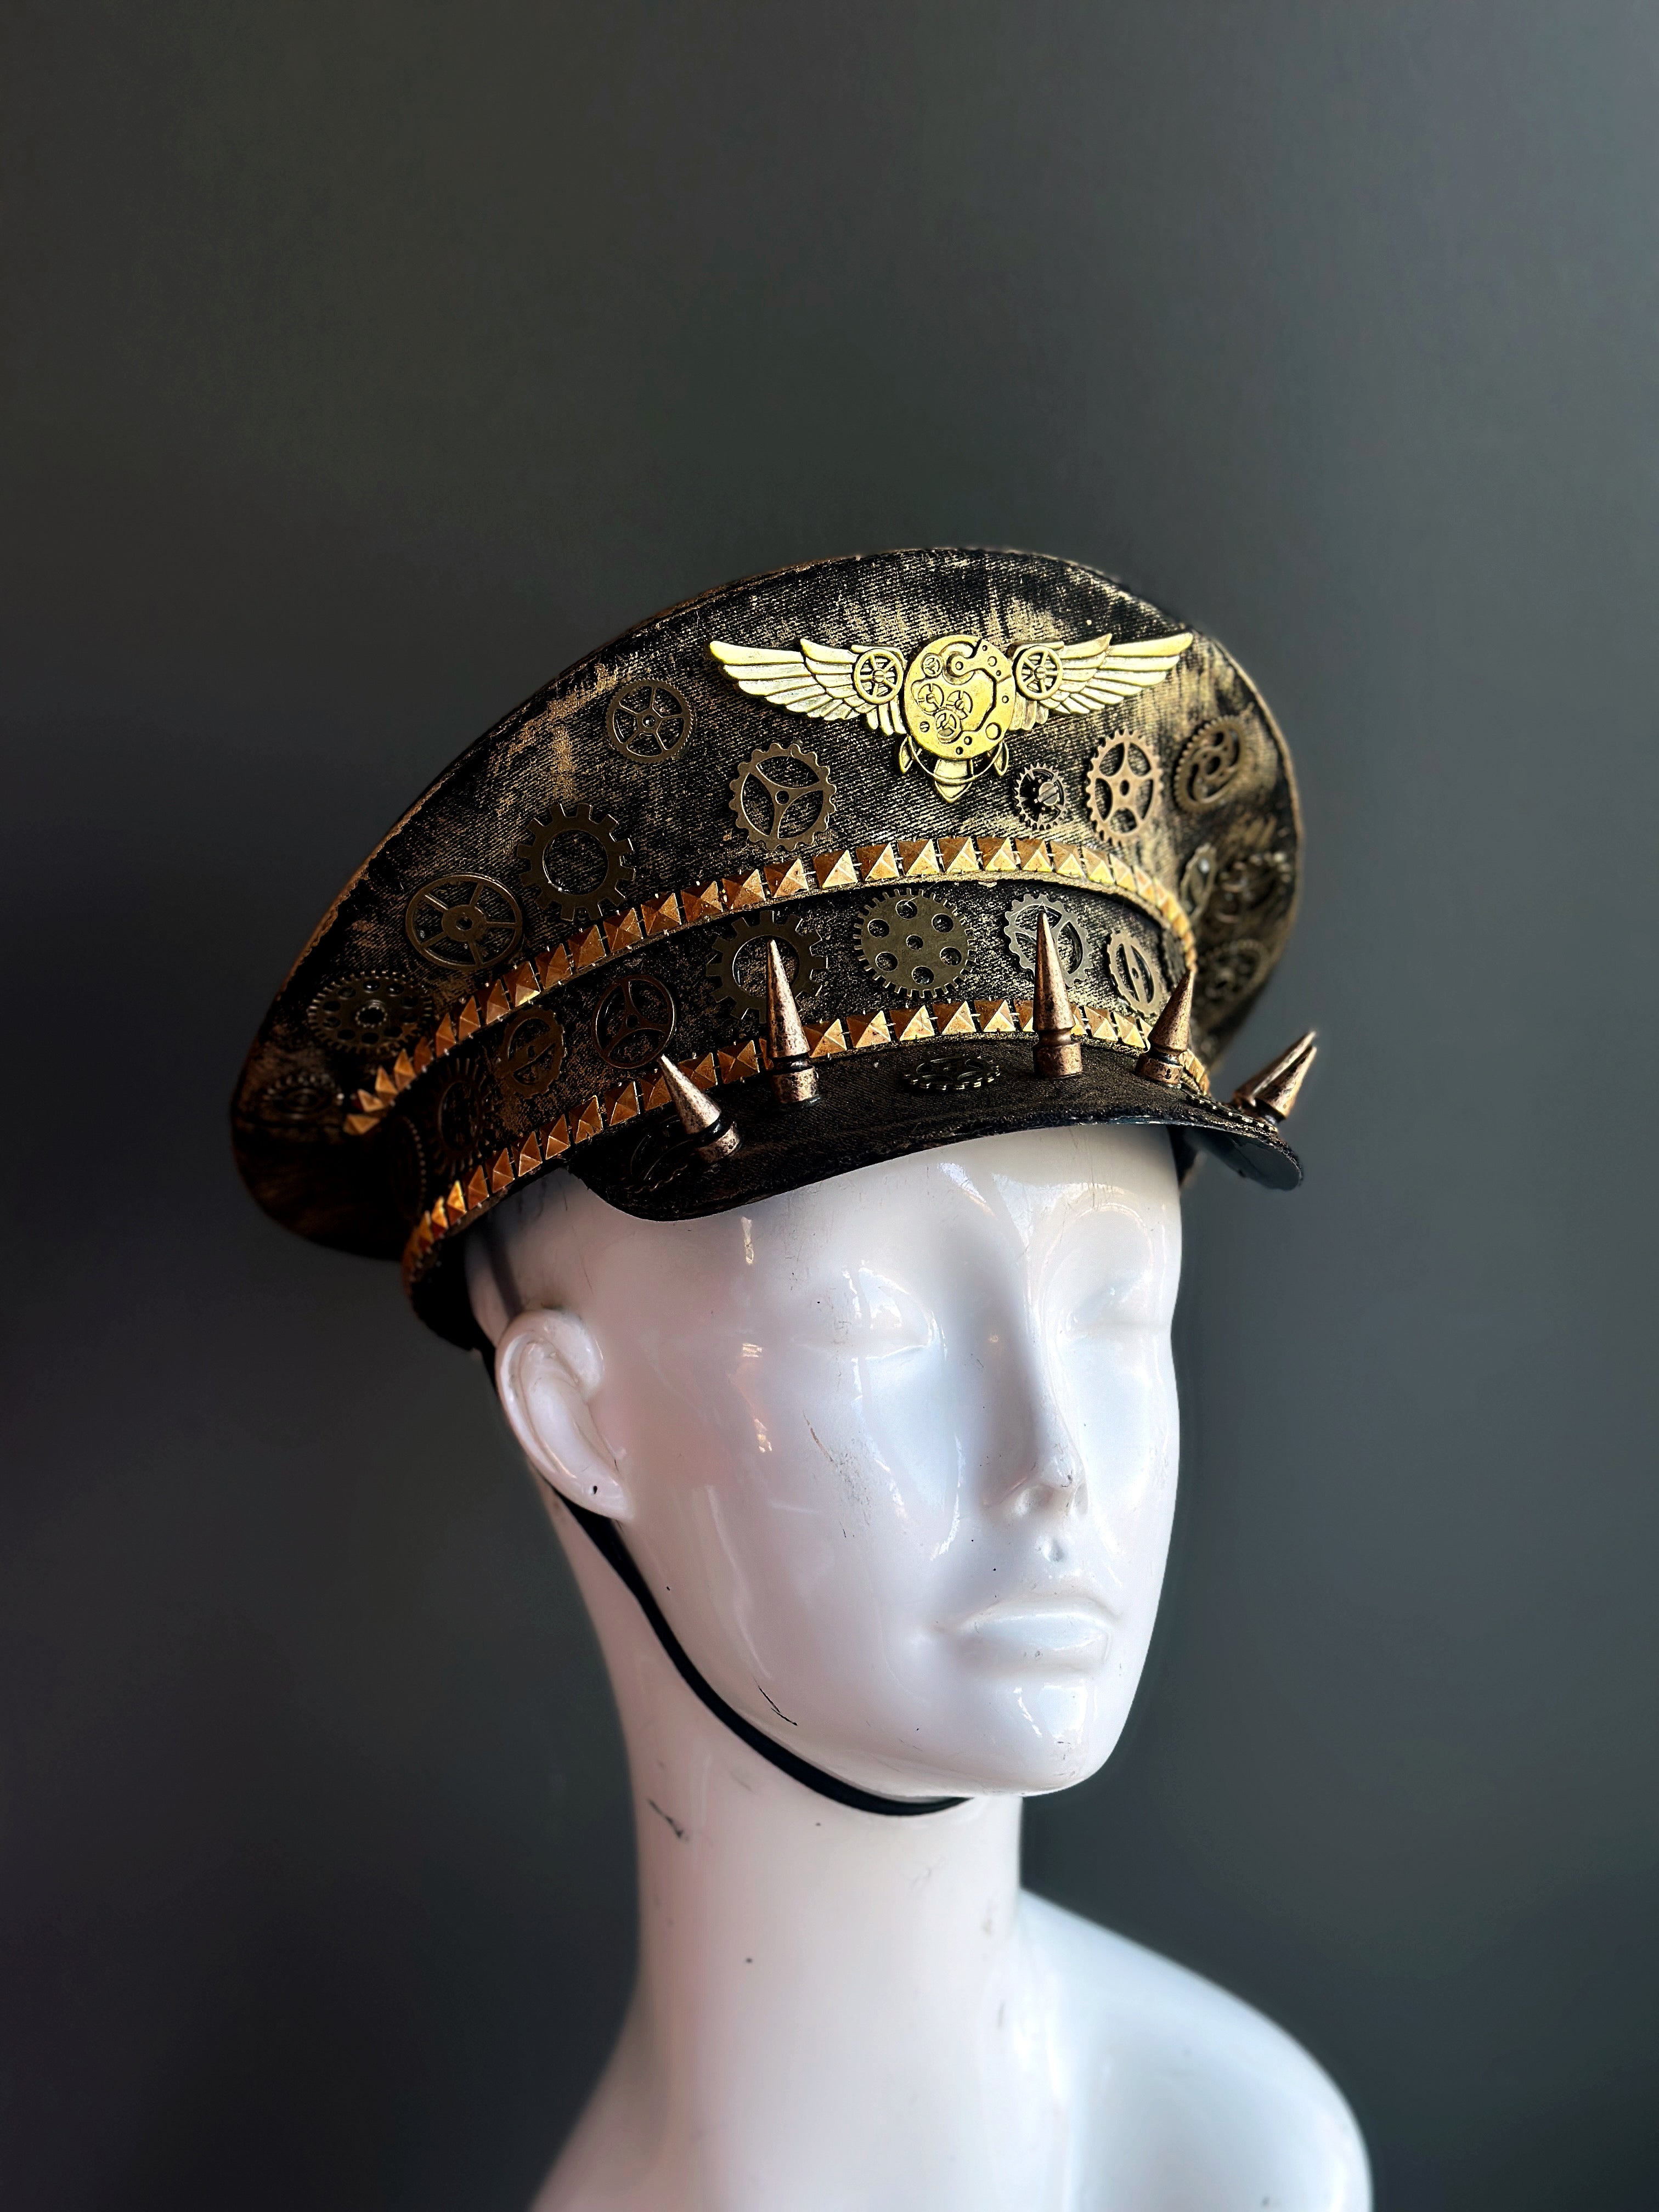 Steampunk captains hat in gold with cogs, gears, and spikes.